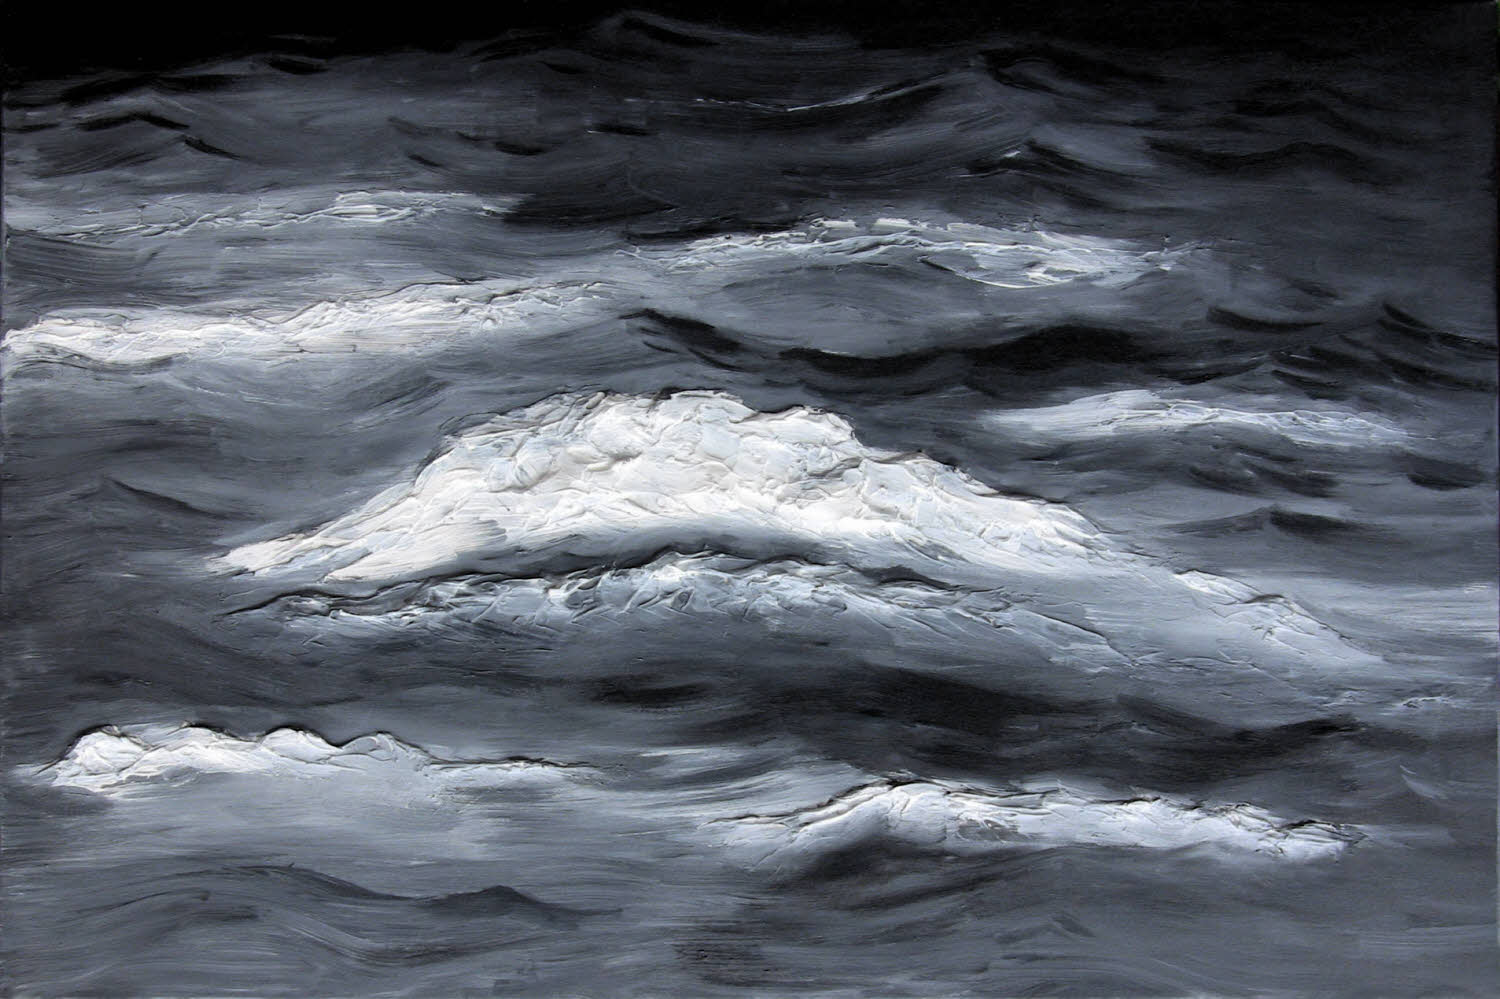 White and Black, 2011, acrylic on canvas, 24x36 inches